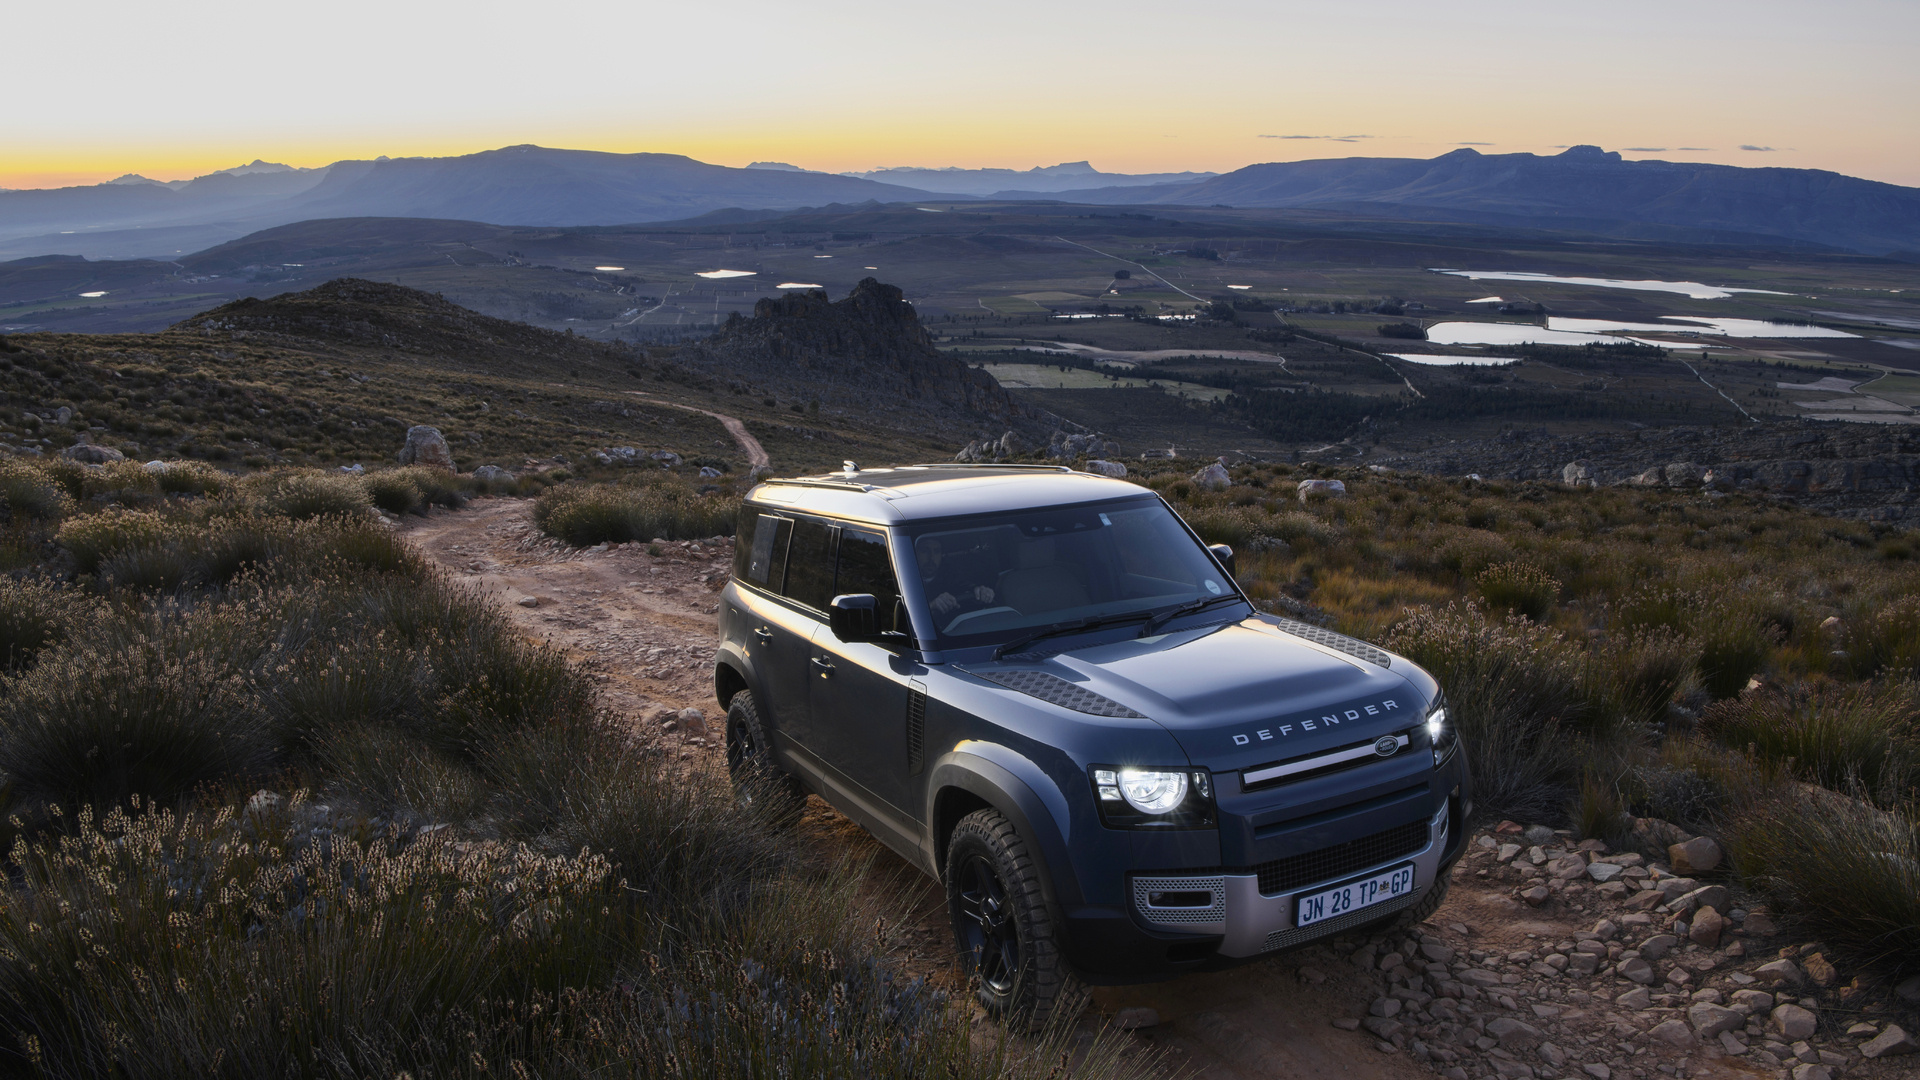 Land Rover Defender 110, Country pack, FHD 1080p, Adventure vehicle, 1920x1080 Full HD Desktop